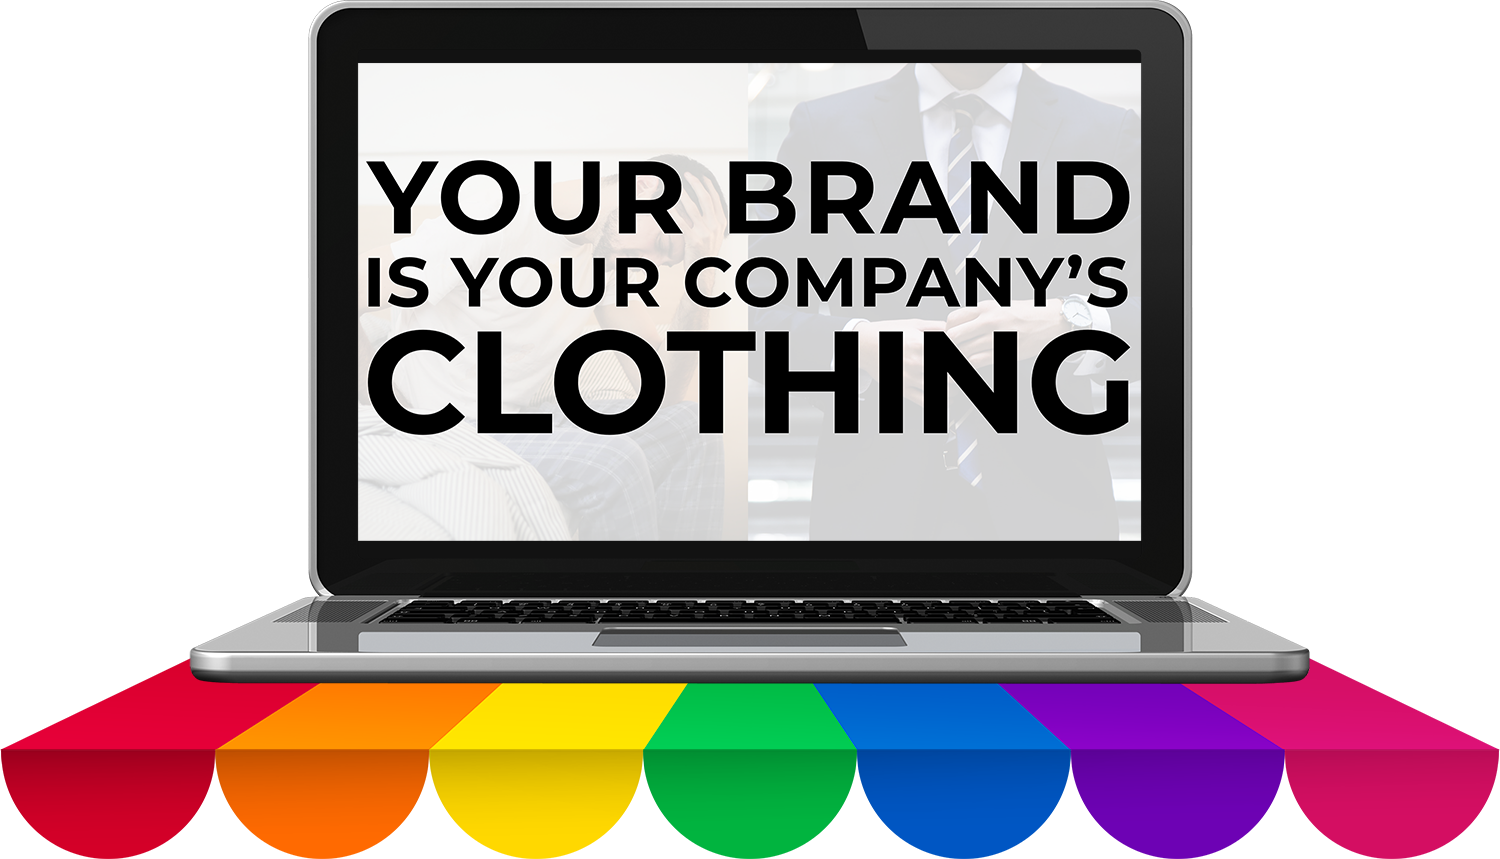 A slide from "Why Design Matters", saying that your brand is your company's clothing